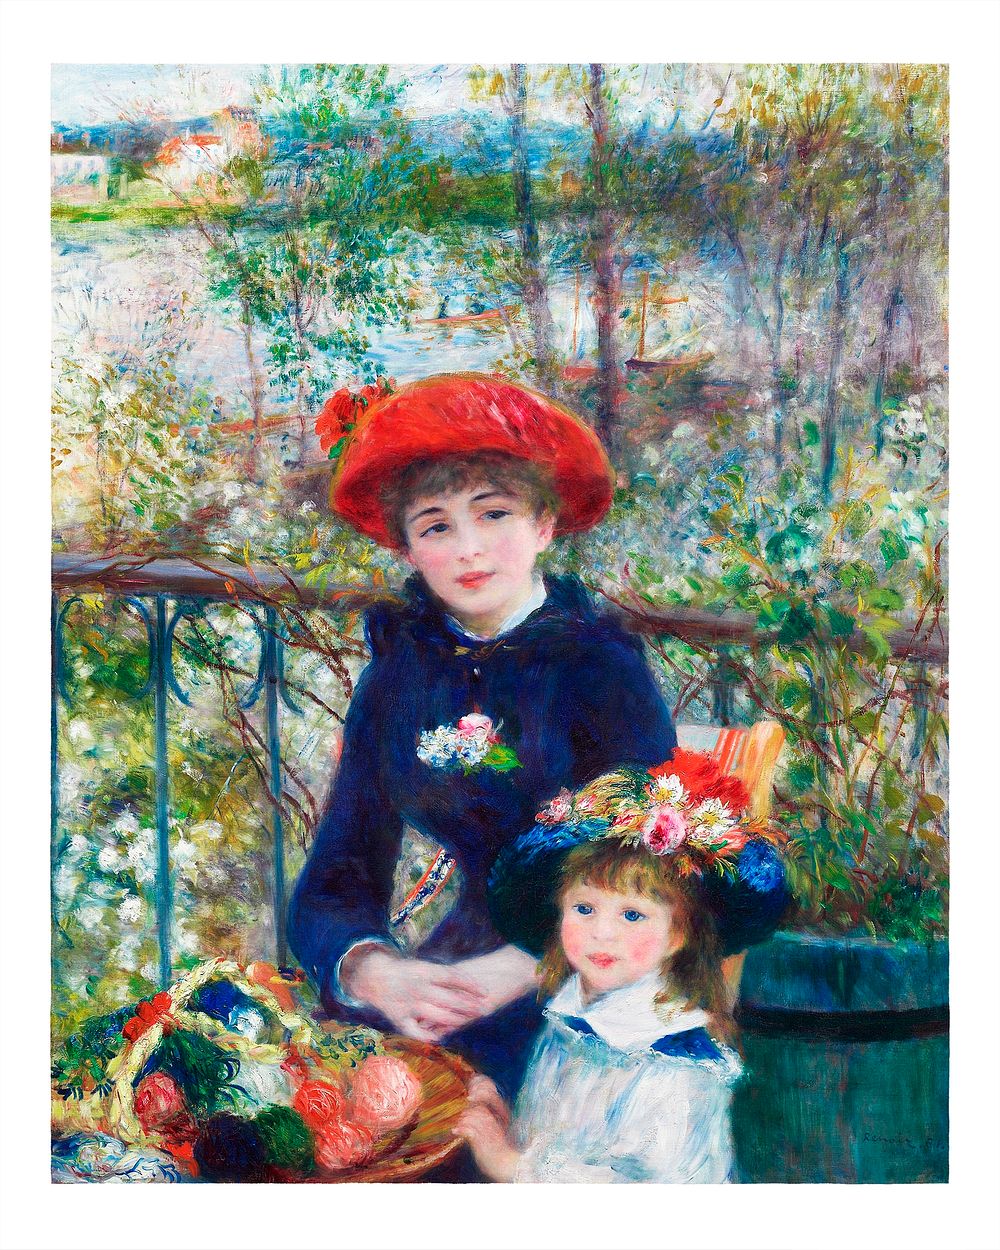 Two sisters on the terrace illustration wall art print and poster design remix from original artwork.